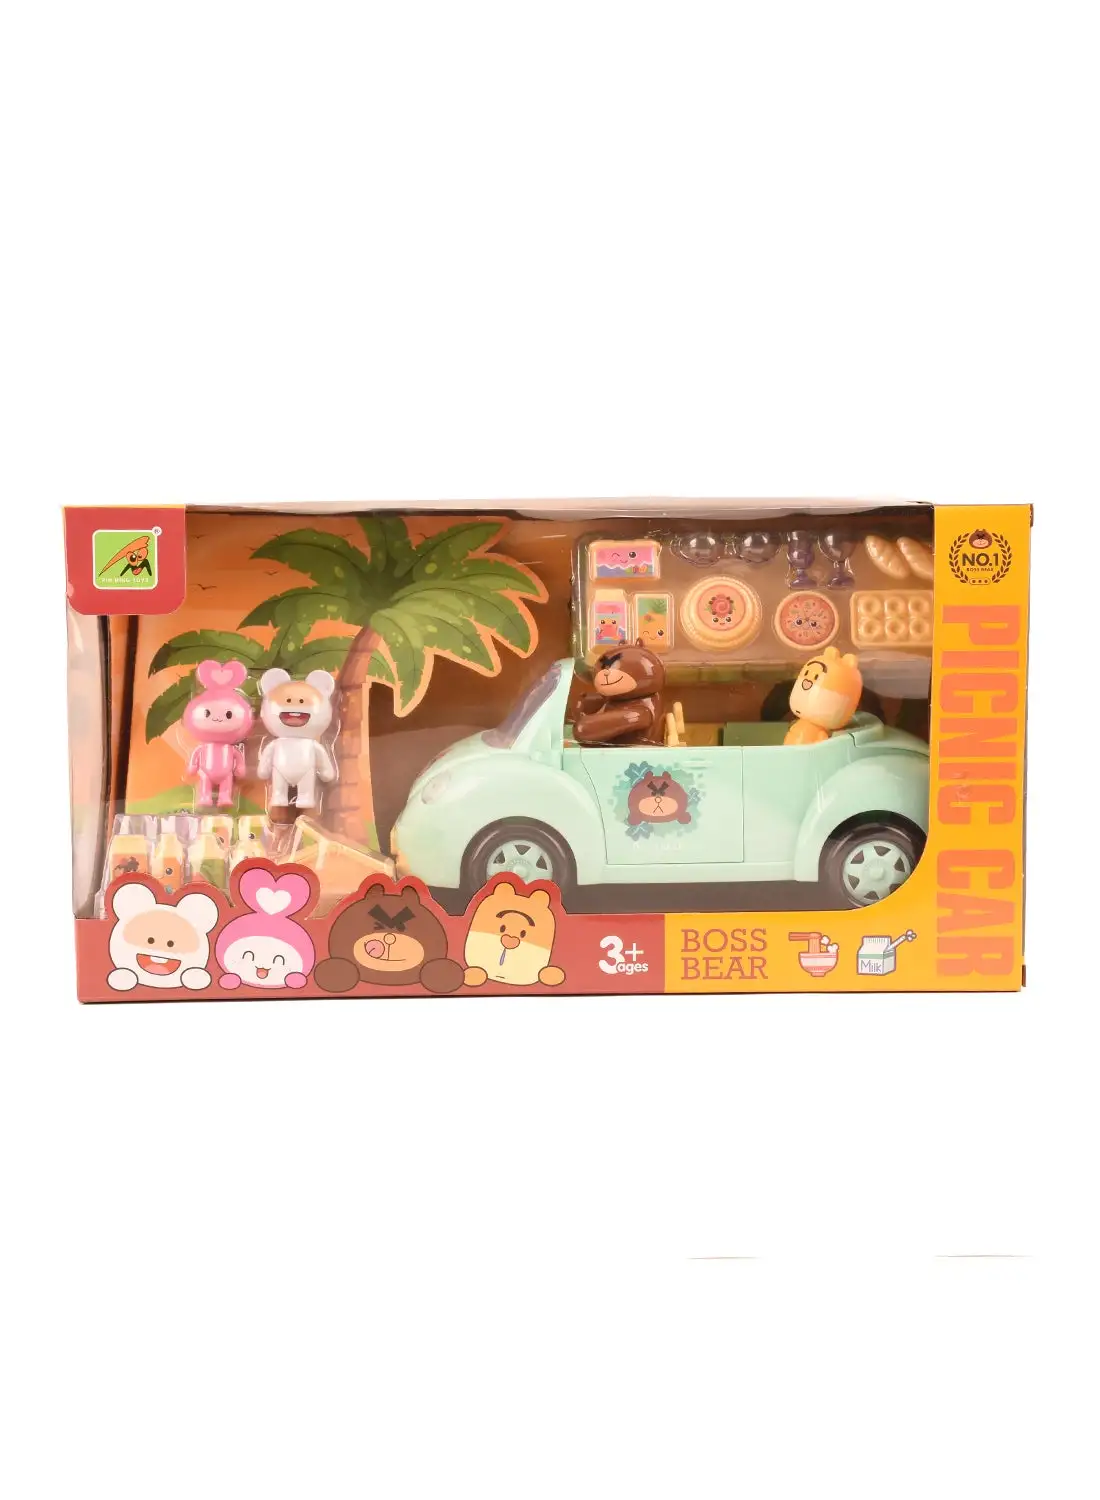 Pinming Complete Holiday Picnic Car Vehicle Playset For Kids With Boss Bear Figure Set